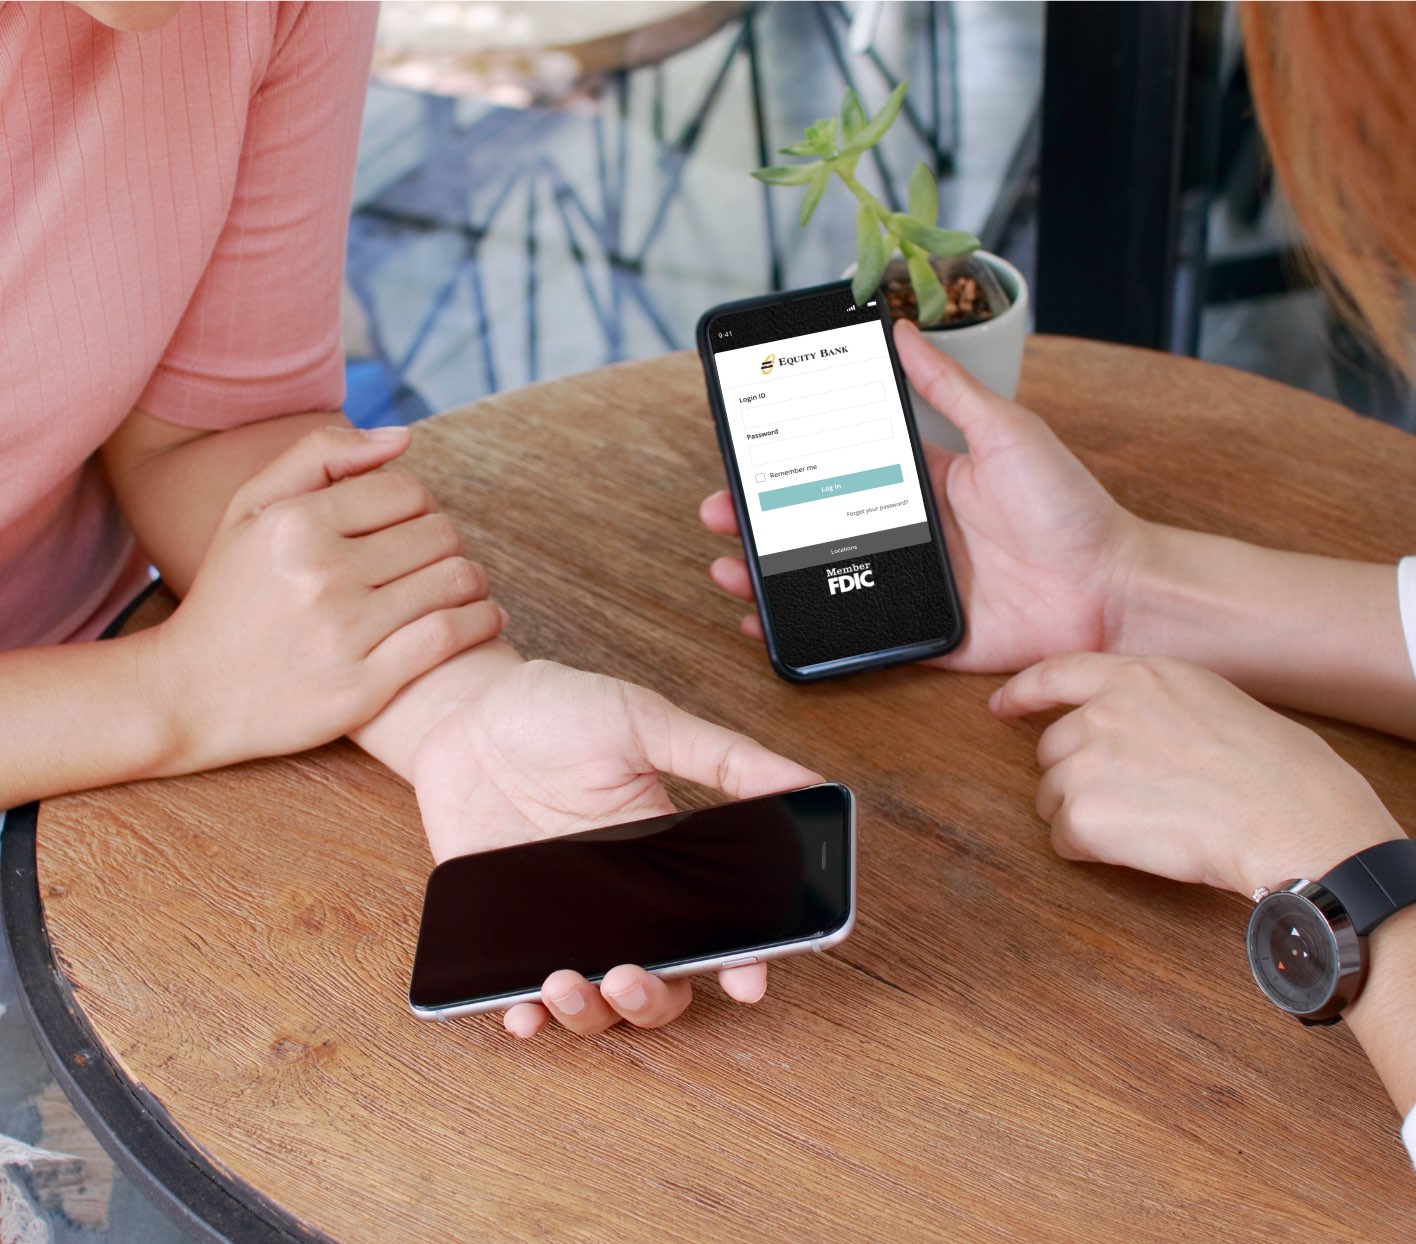 Two people holding phones over a table using the banking app